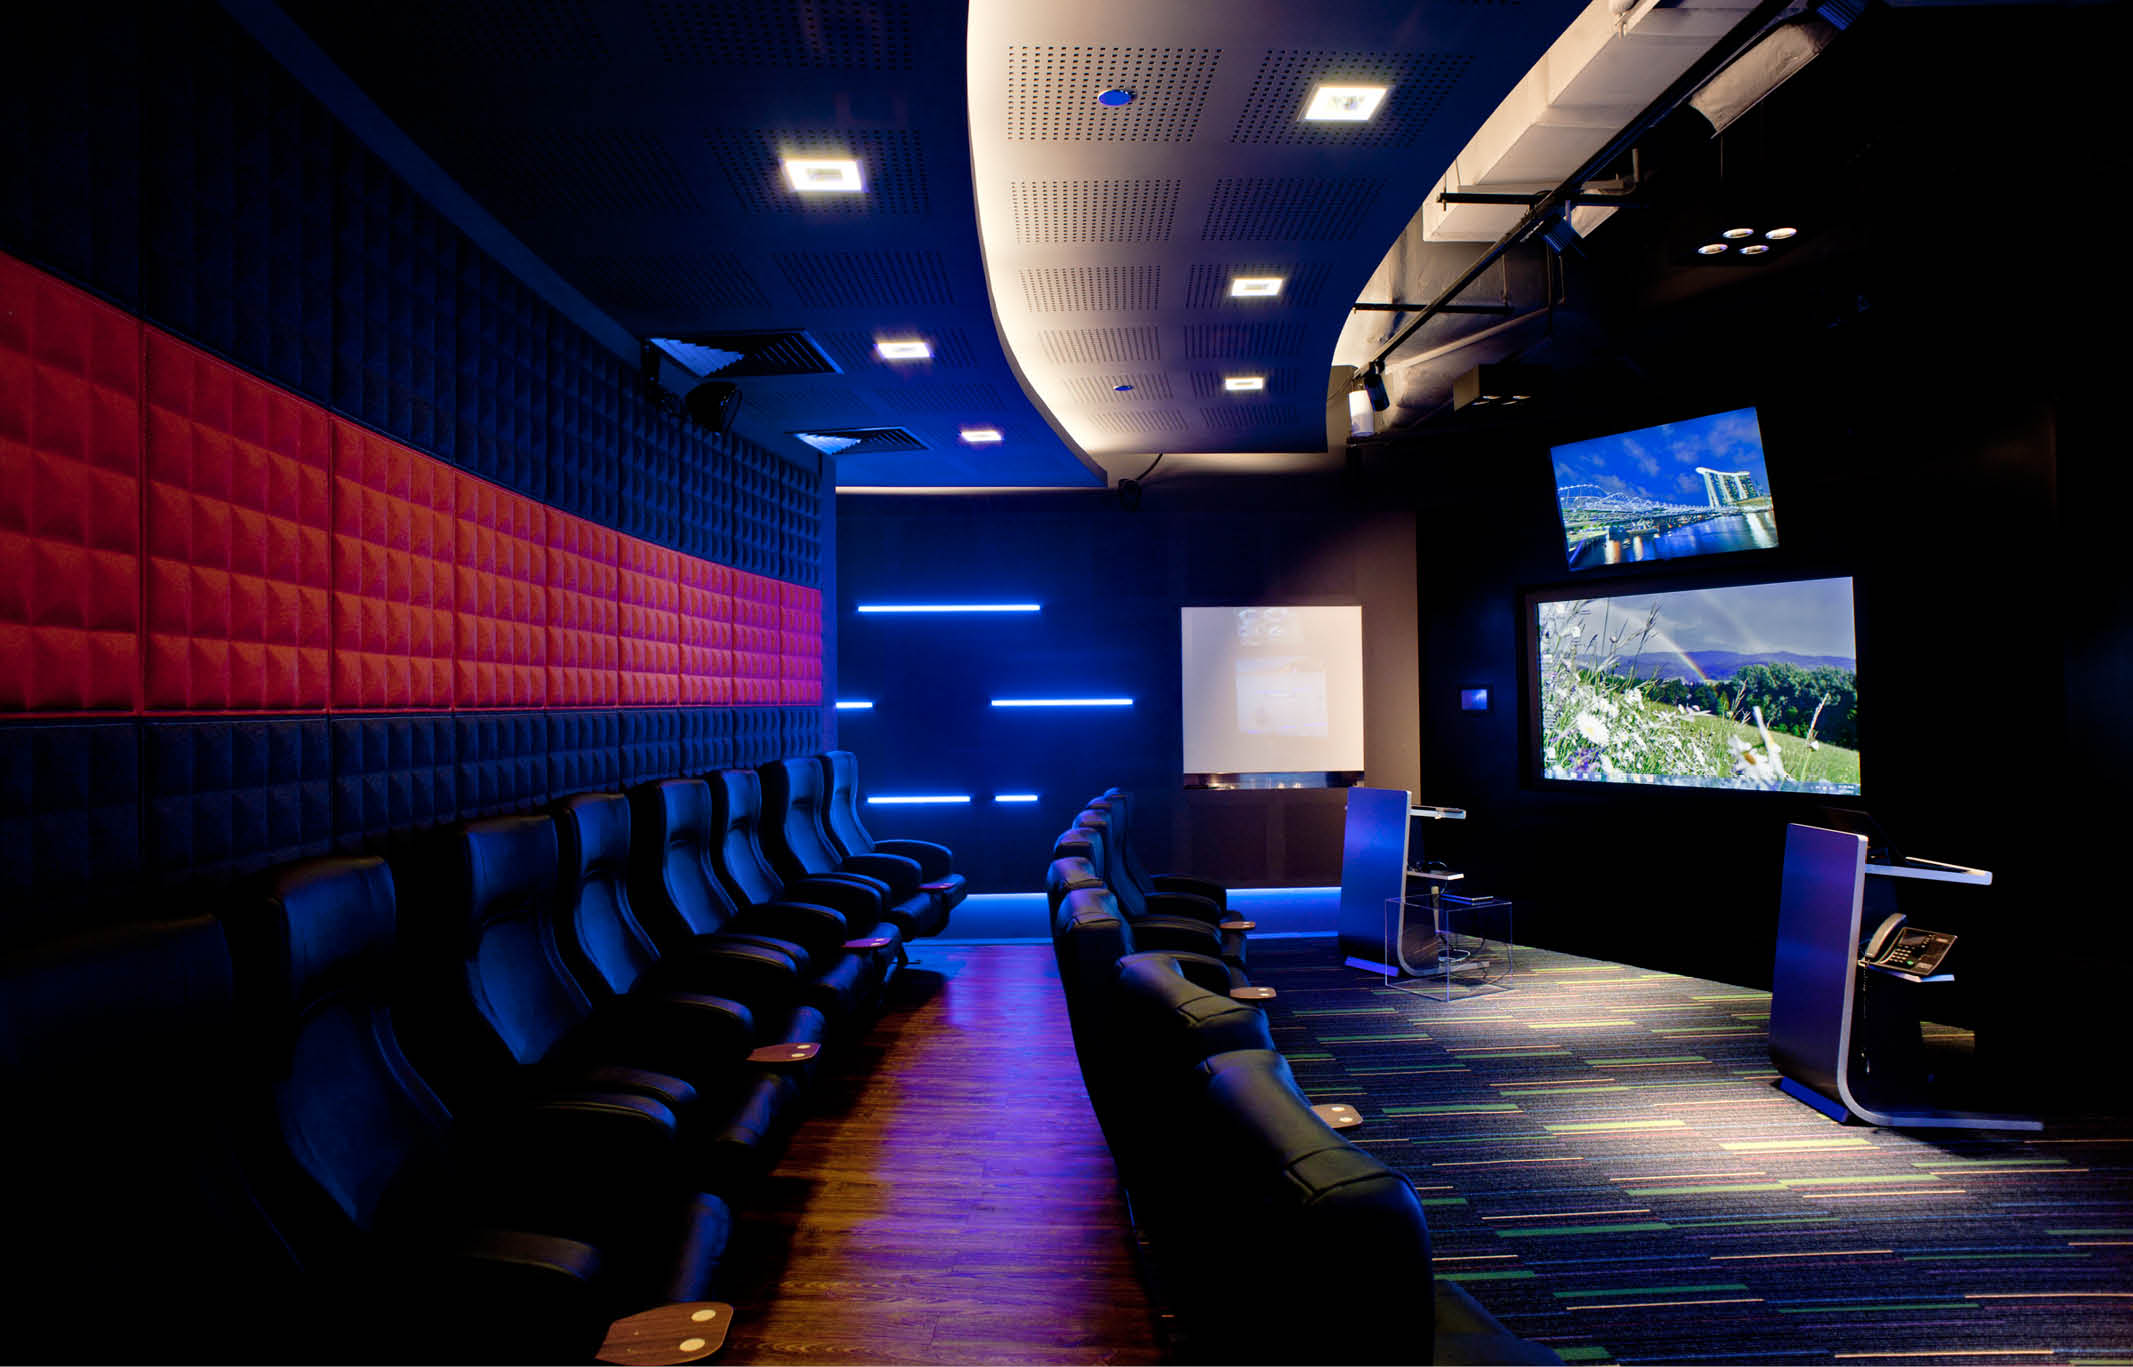 Mini cinema at Microsoft office Singapore fit out by ISG Ltd